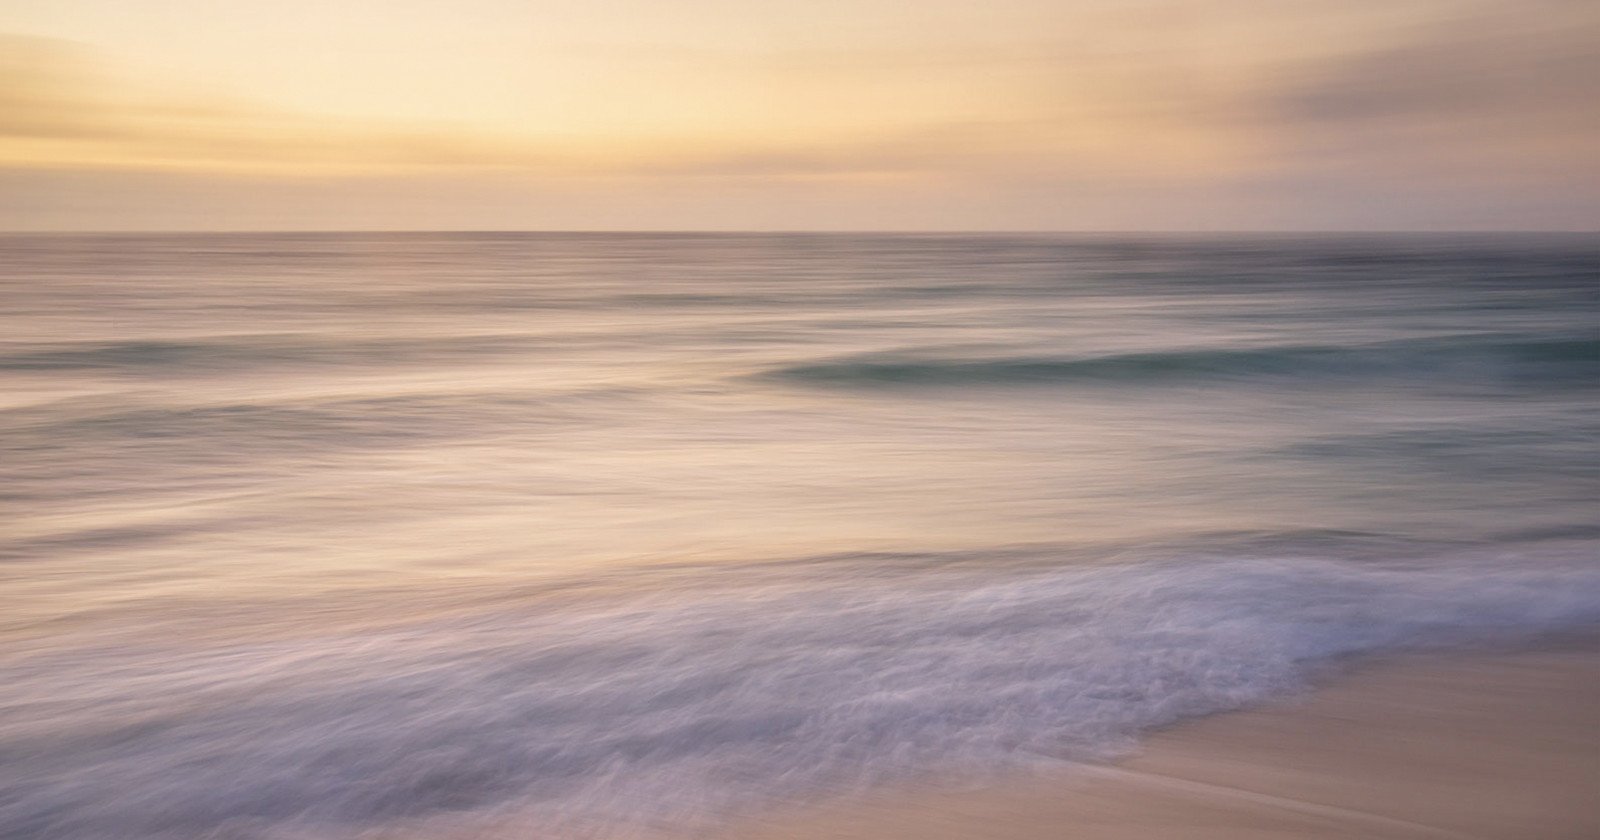 Abstract Photo Series Captures the Serenity of the Ocean